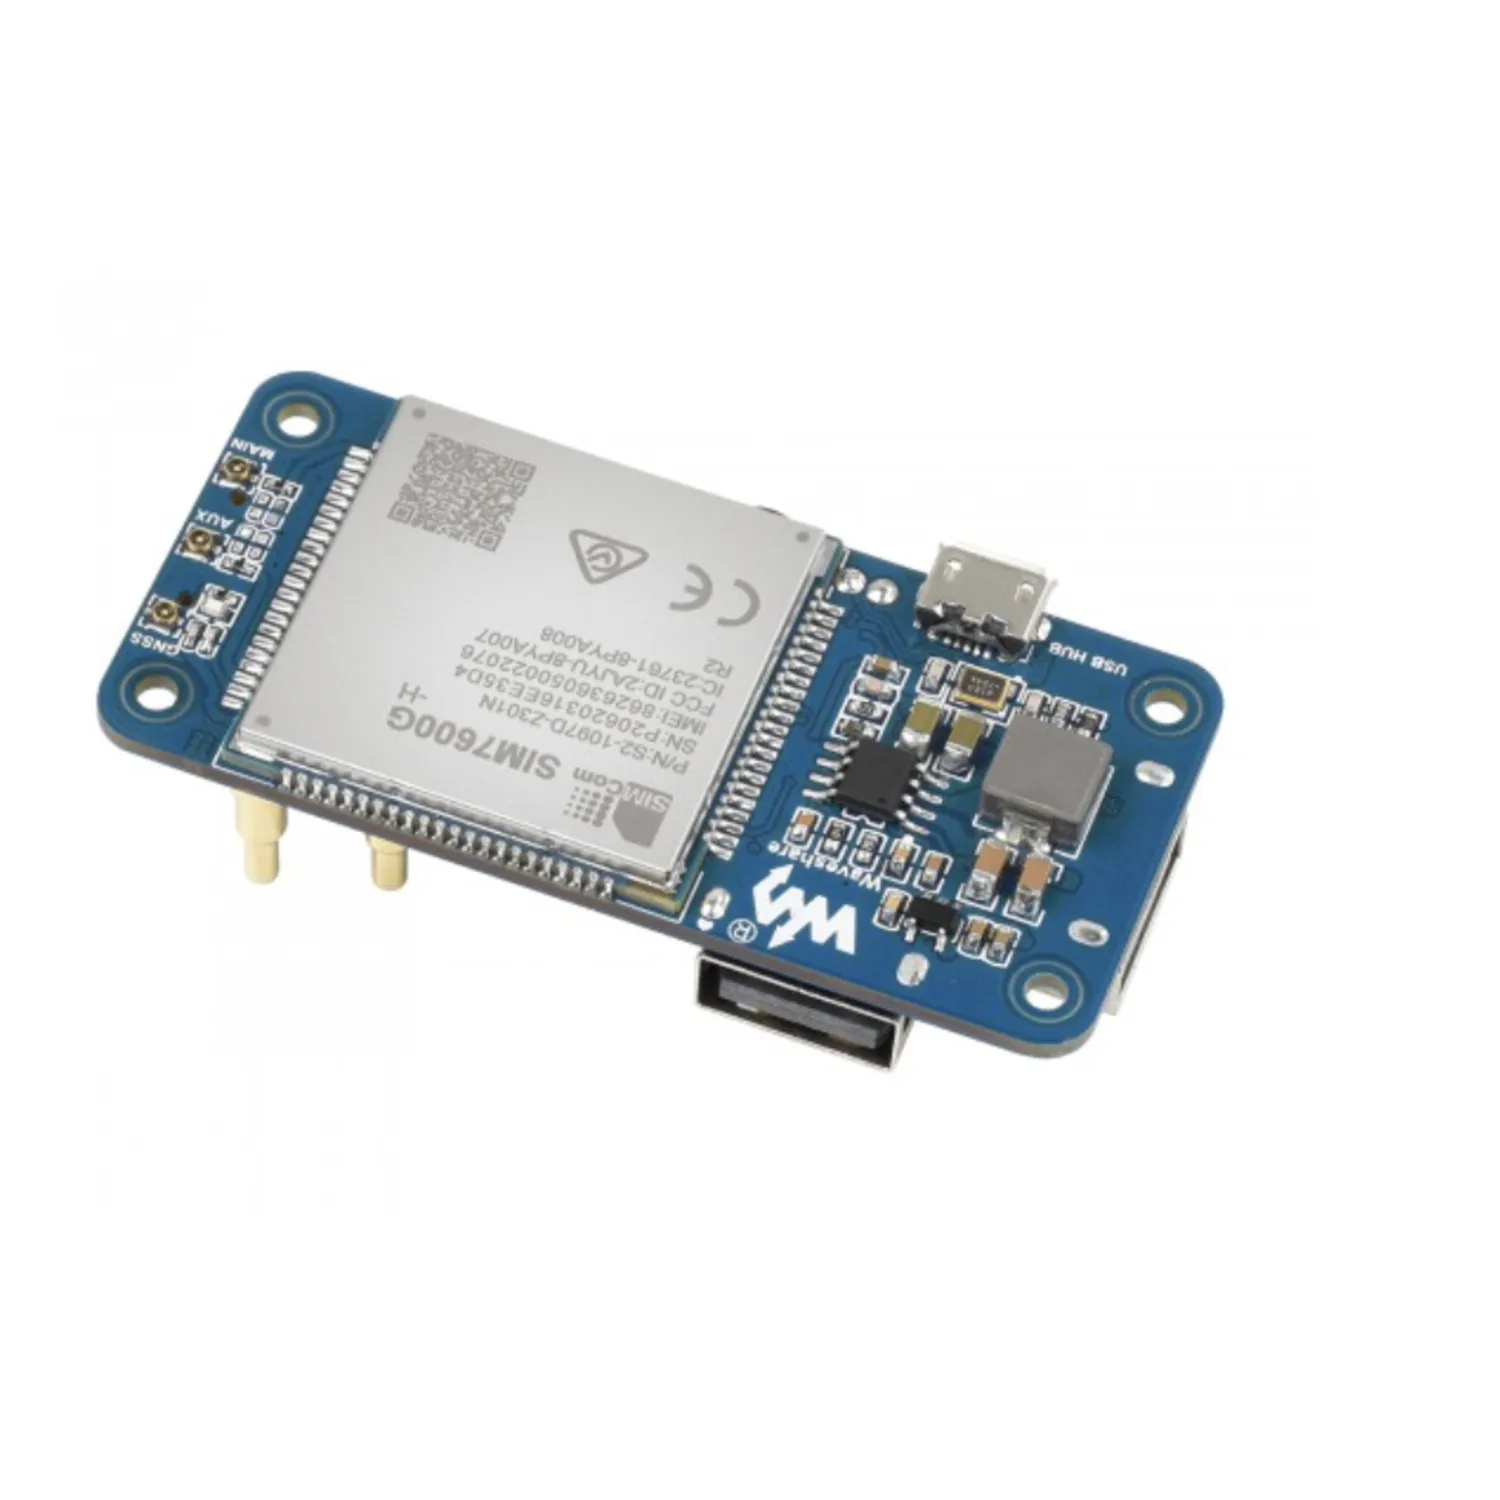 Photo of SIM7600G-H 4G HAT (B) for Raspberry Pi, LTE Cat-4 4G / 3G / 2G Support, GNSS Positioning, Global Band